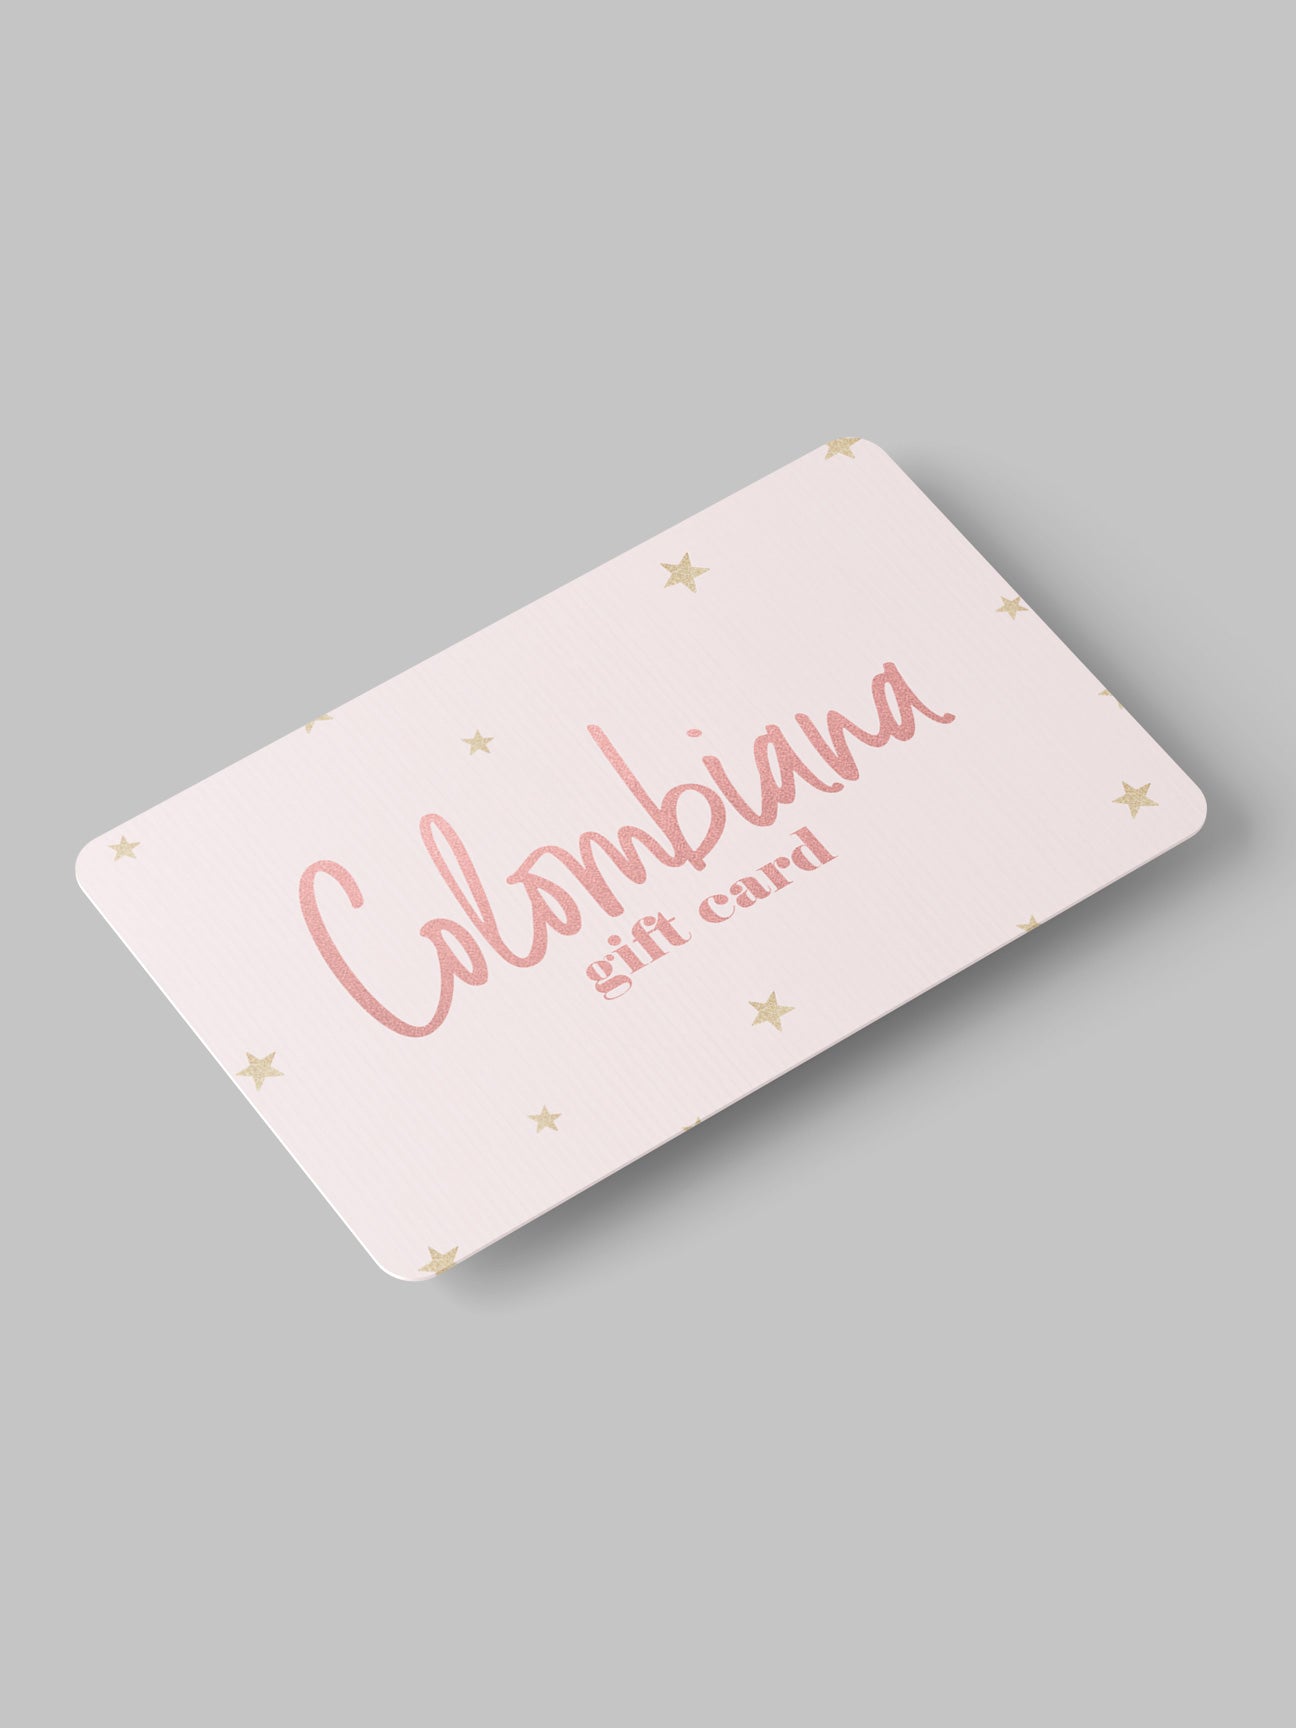 Colombiana gift card